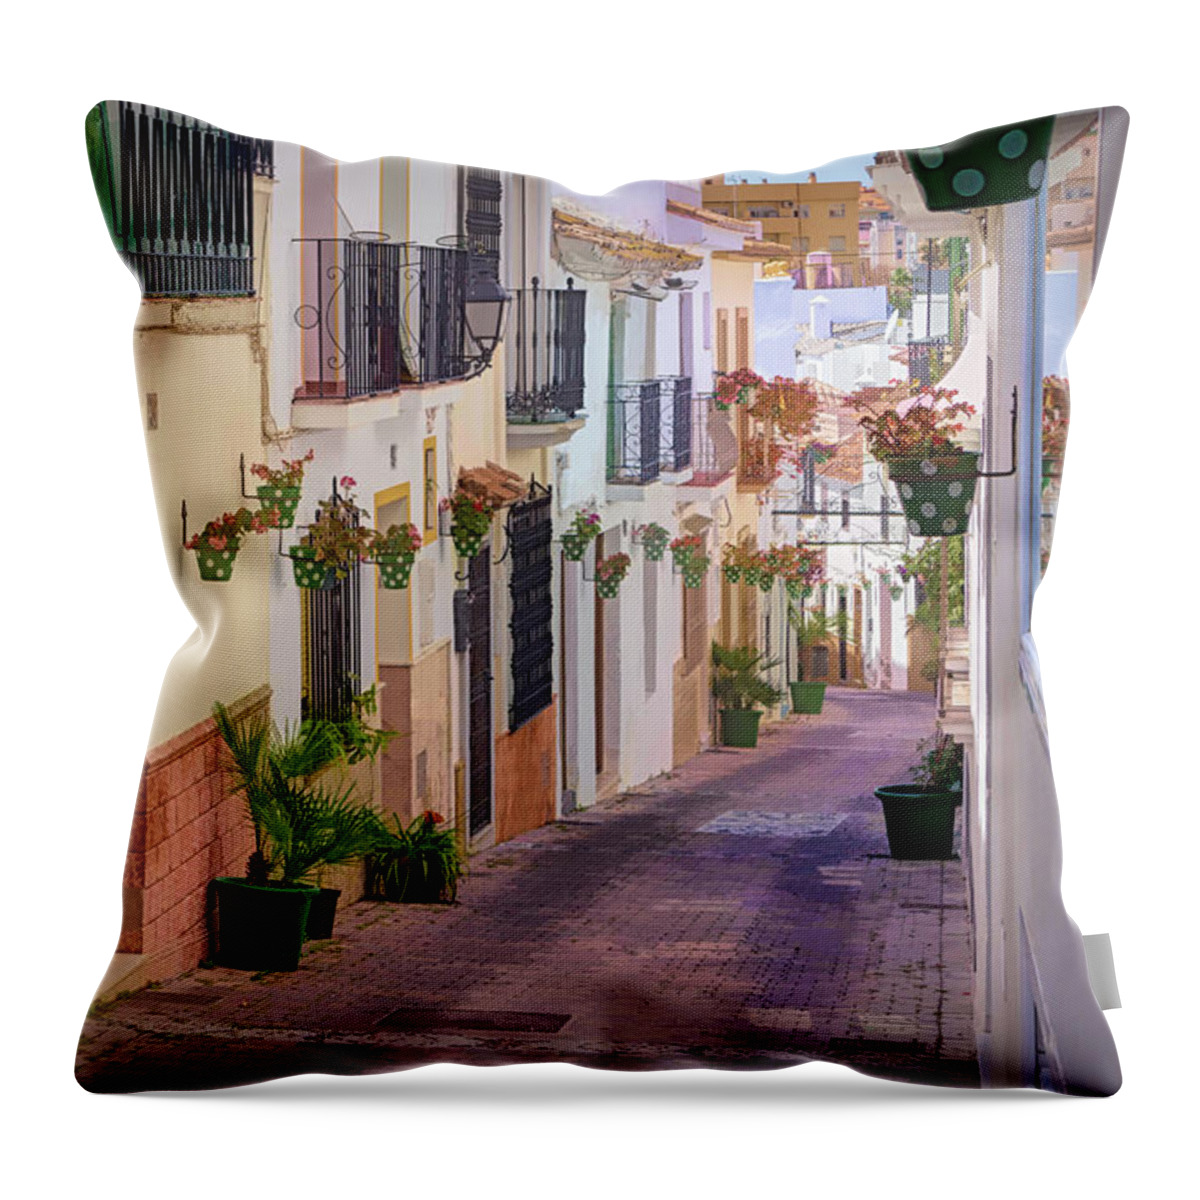 Andalusian City Throw Pillow featuring the photograph A visit to the city of Estepona - 7 by Jordi Carrio Jamila